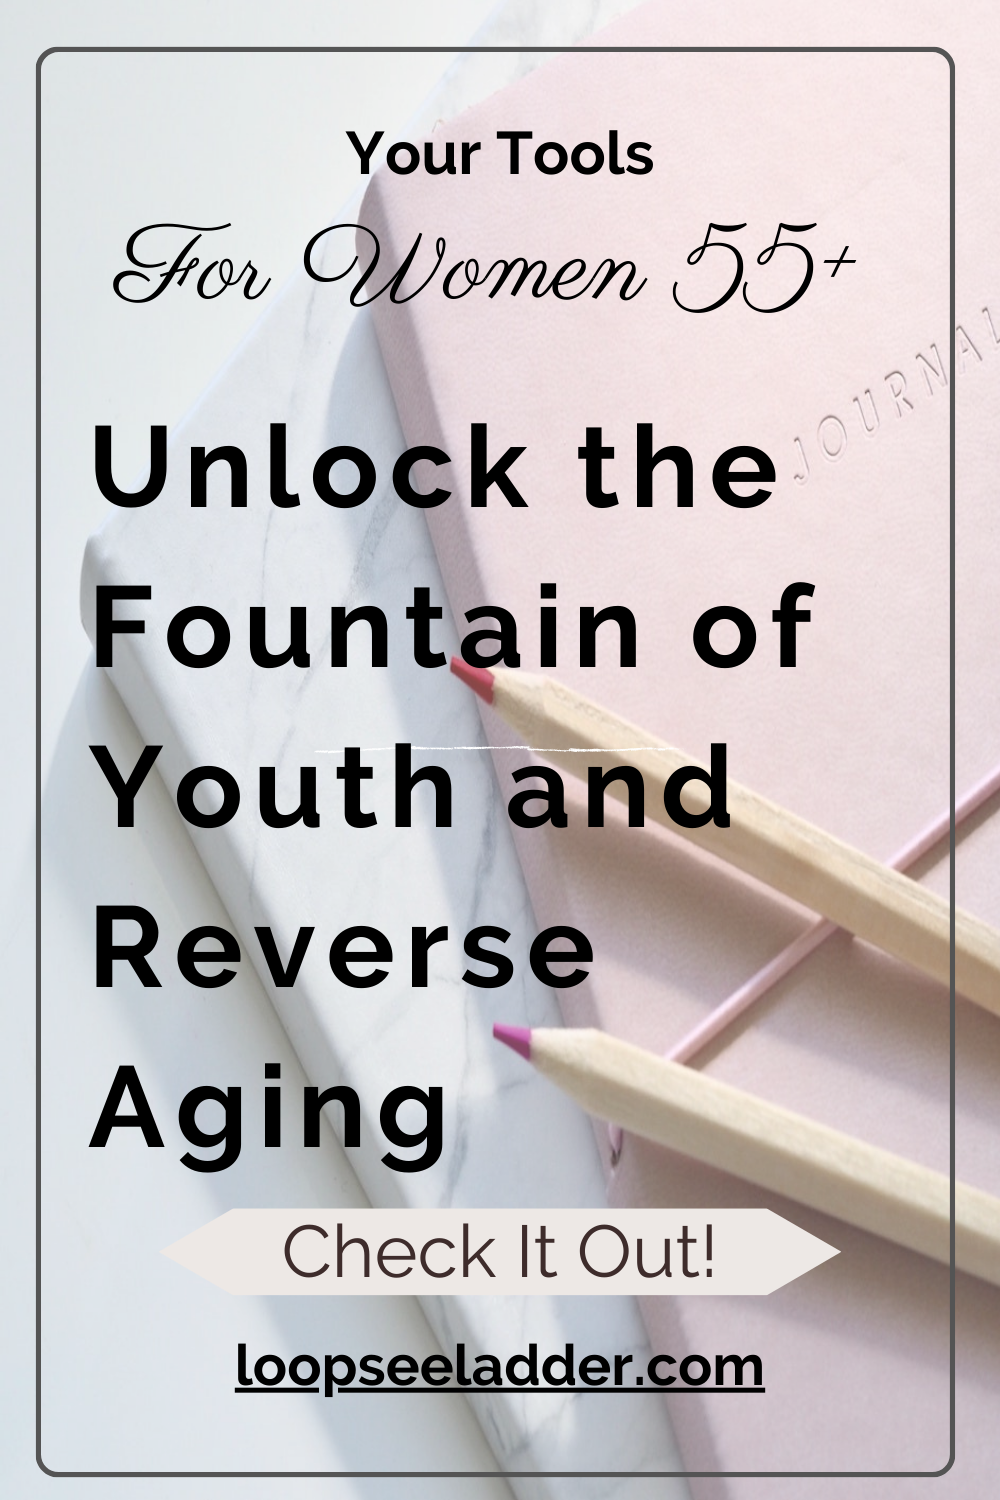 Unlocking the Fountain of Youth: The Astonishing Ways Women 55+ Are Reversing Aging